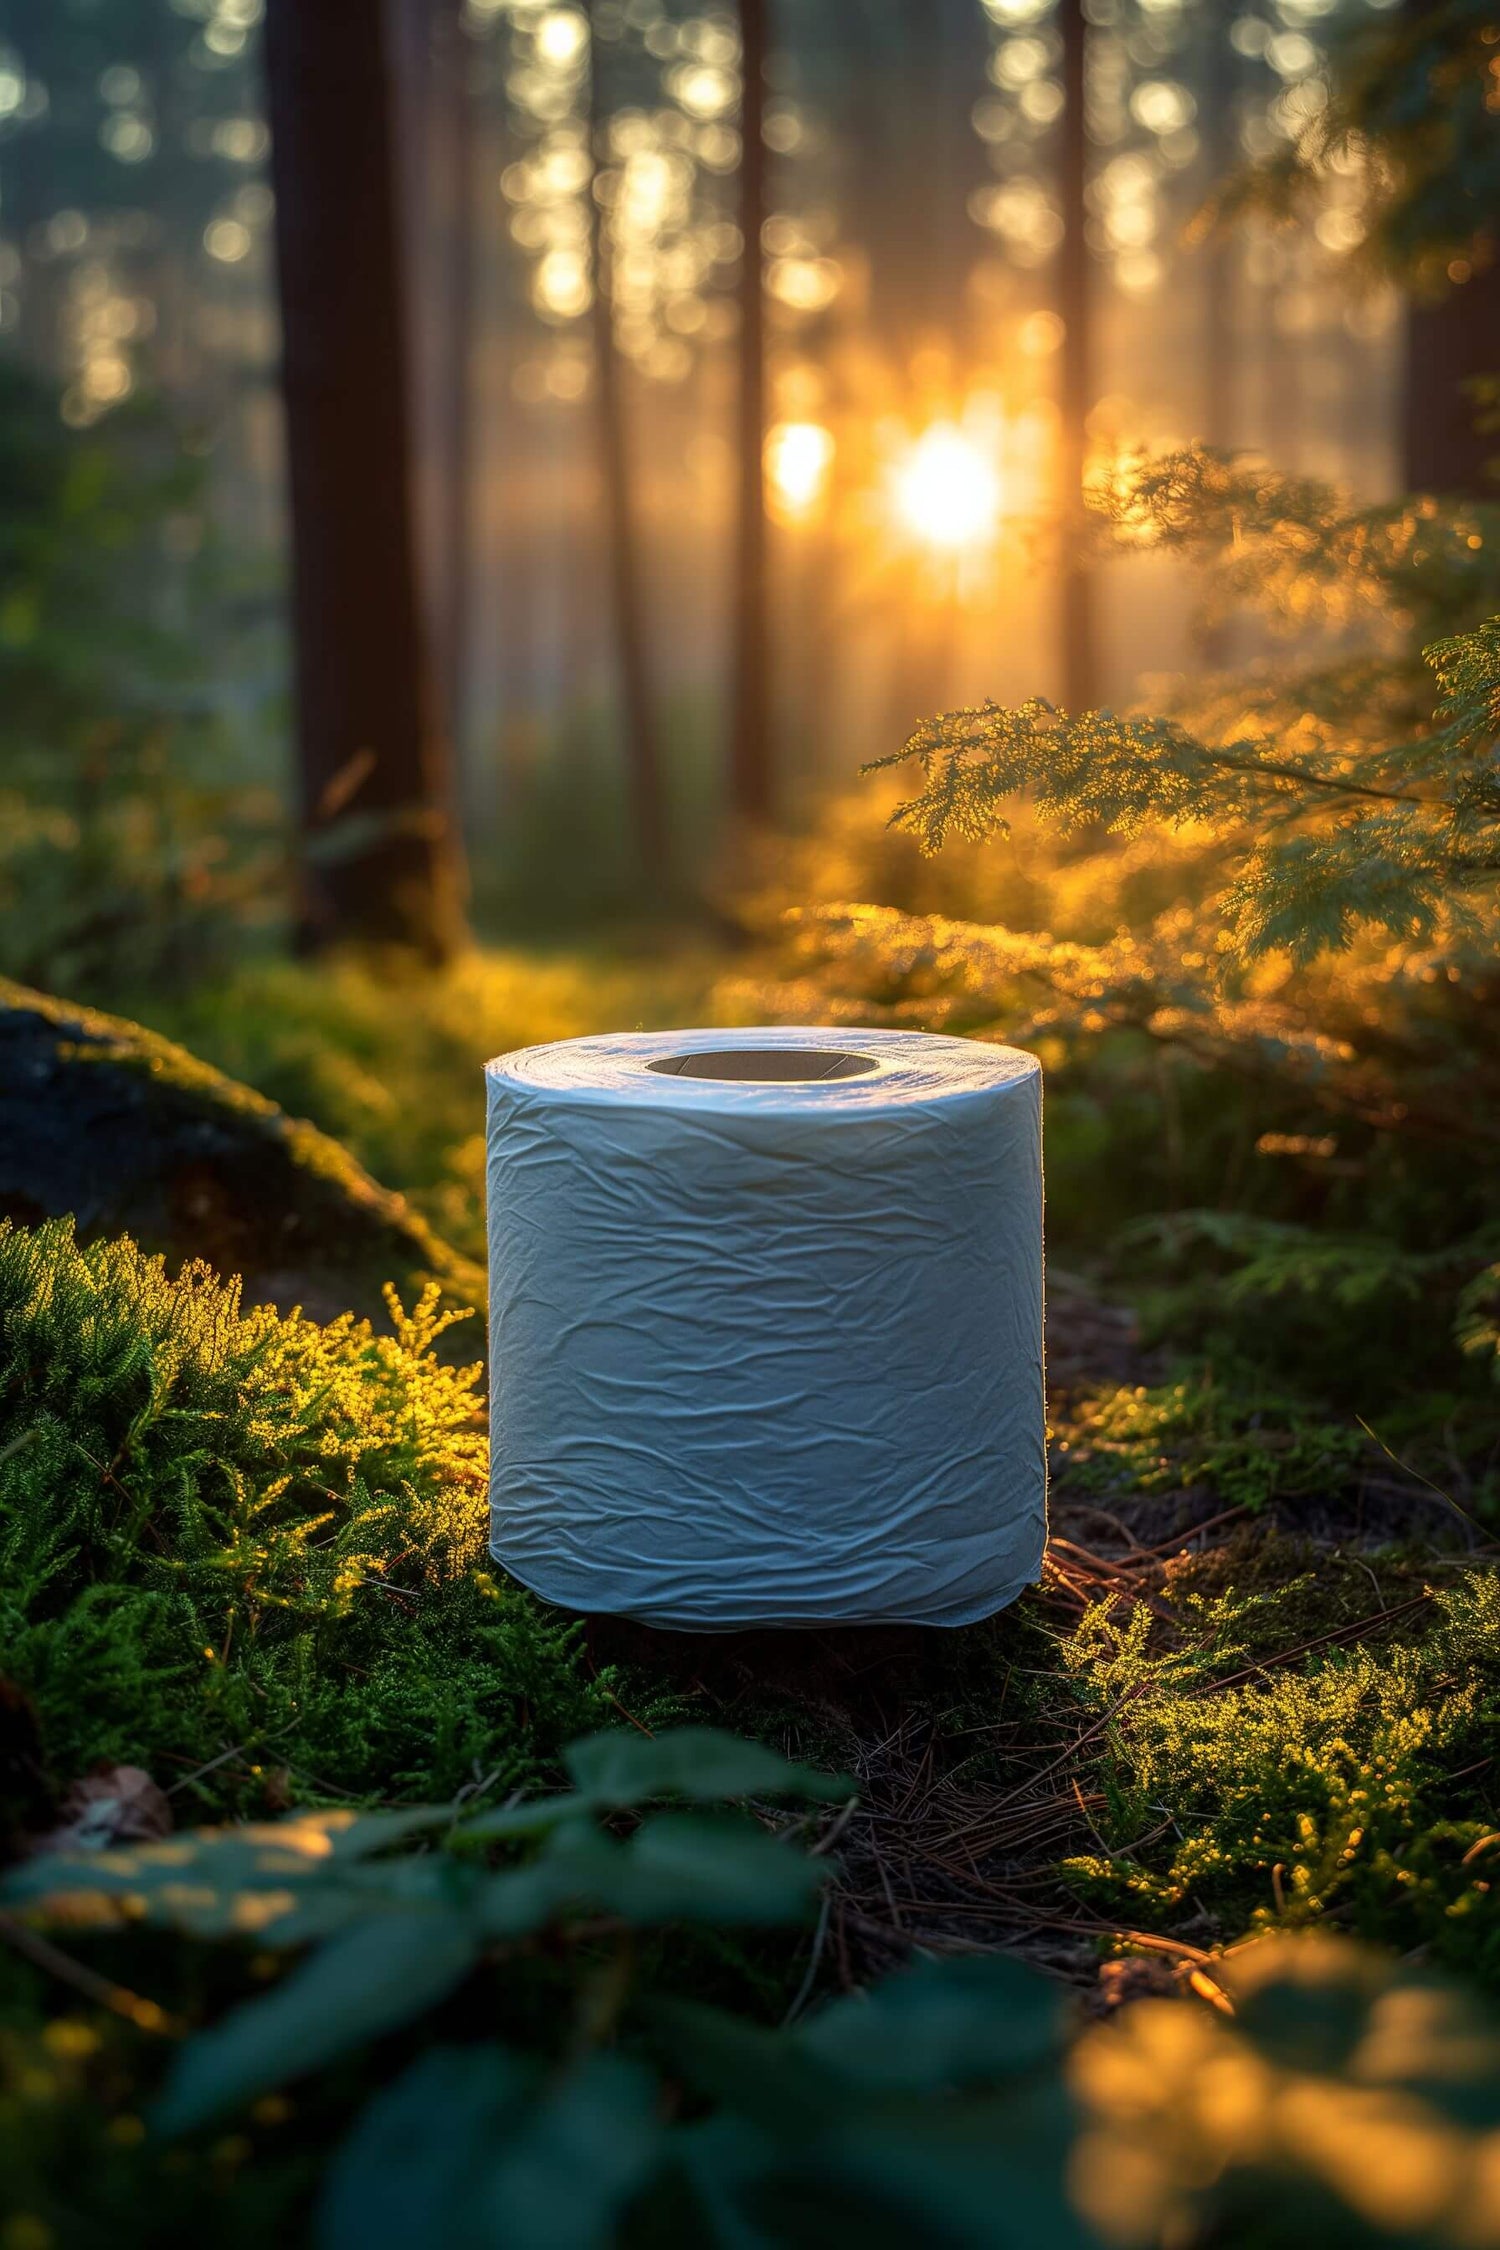 Toilet paper roll in the forrest